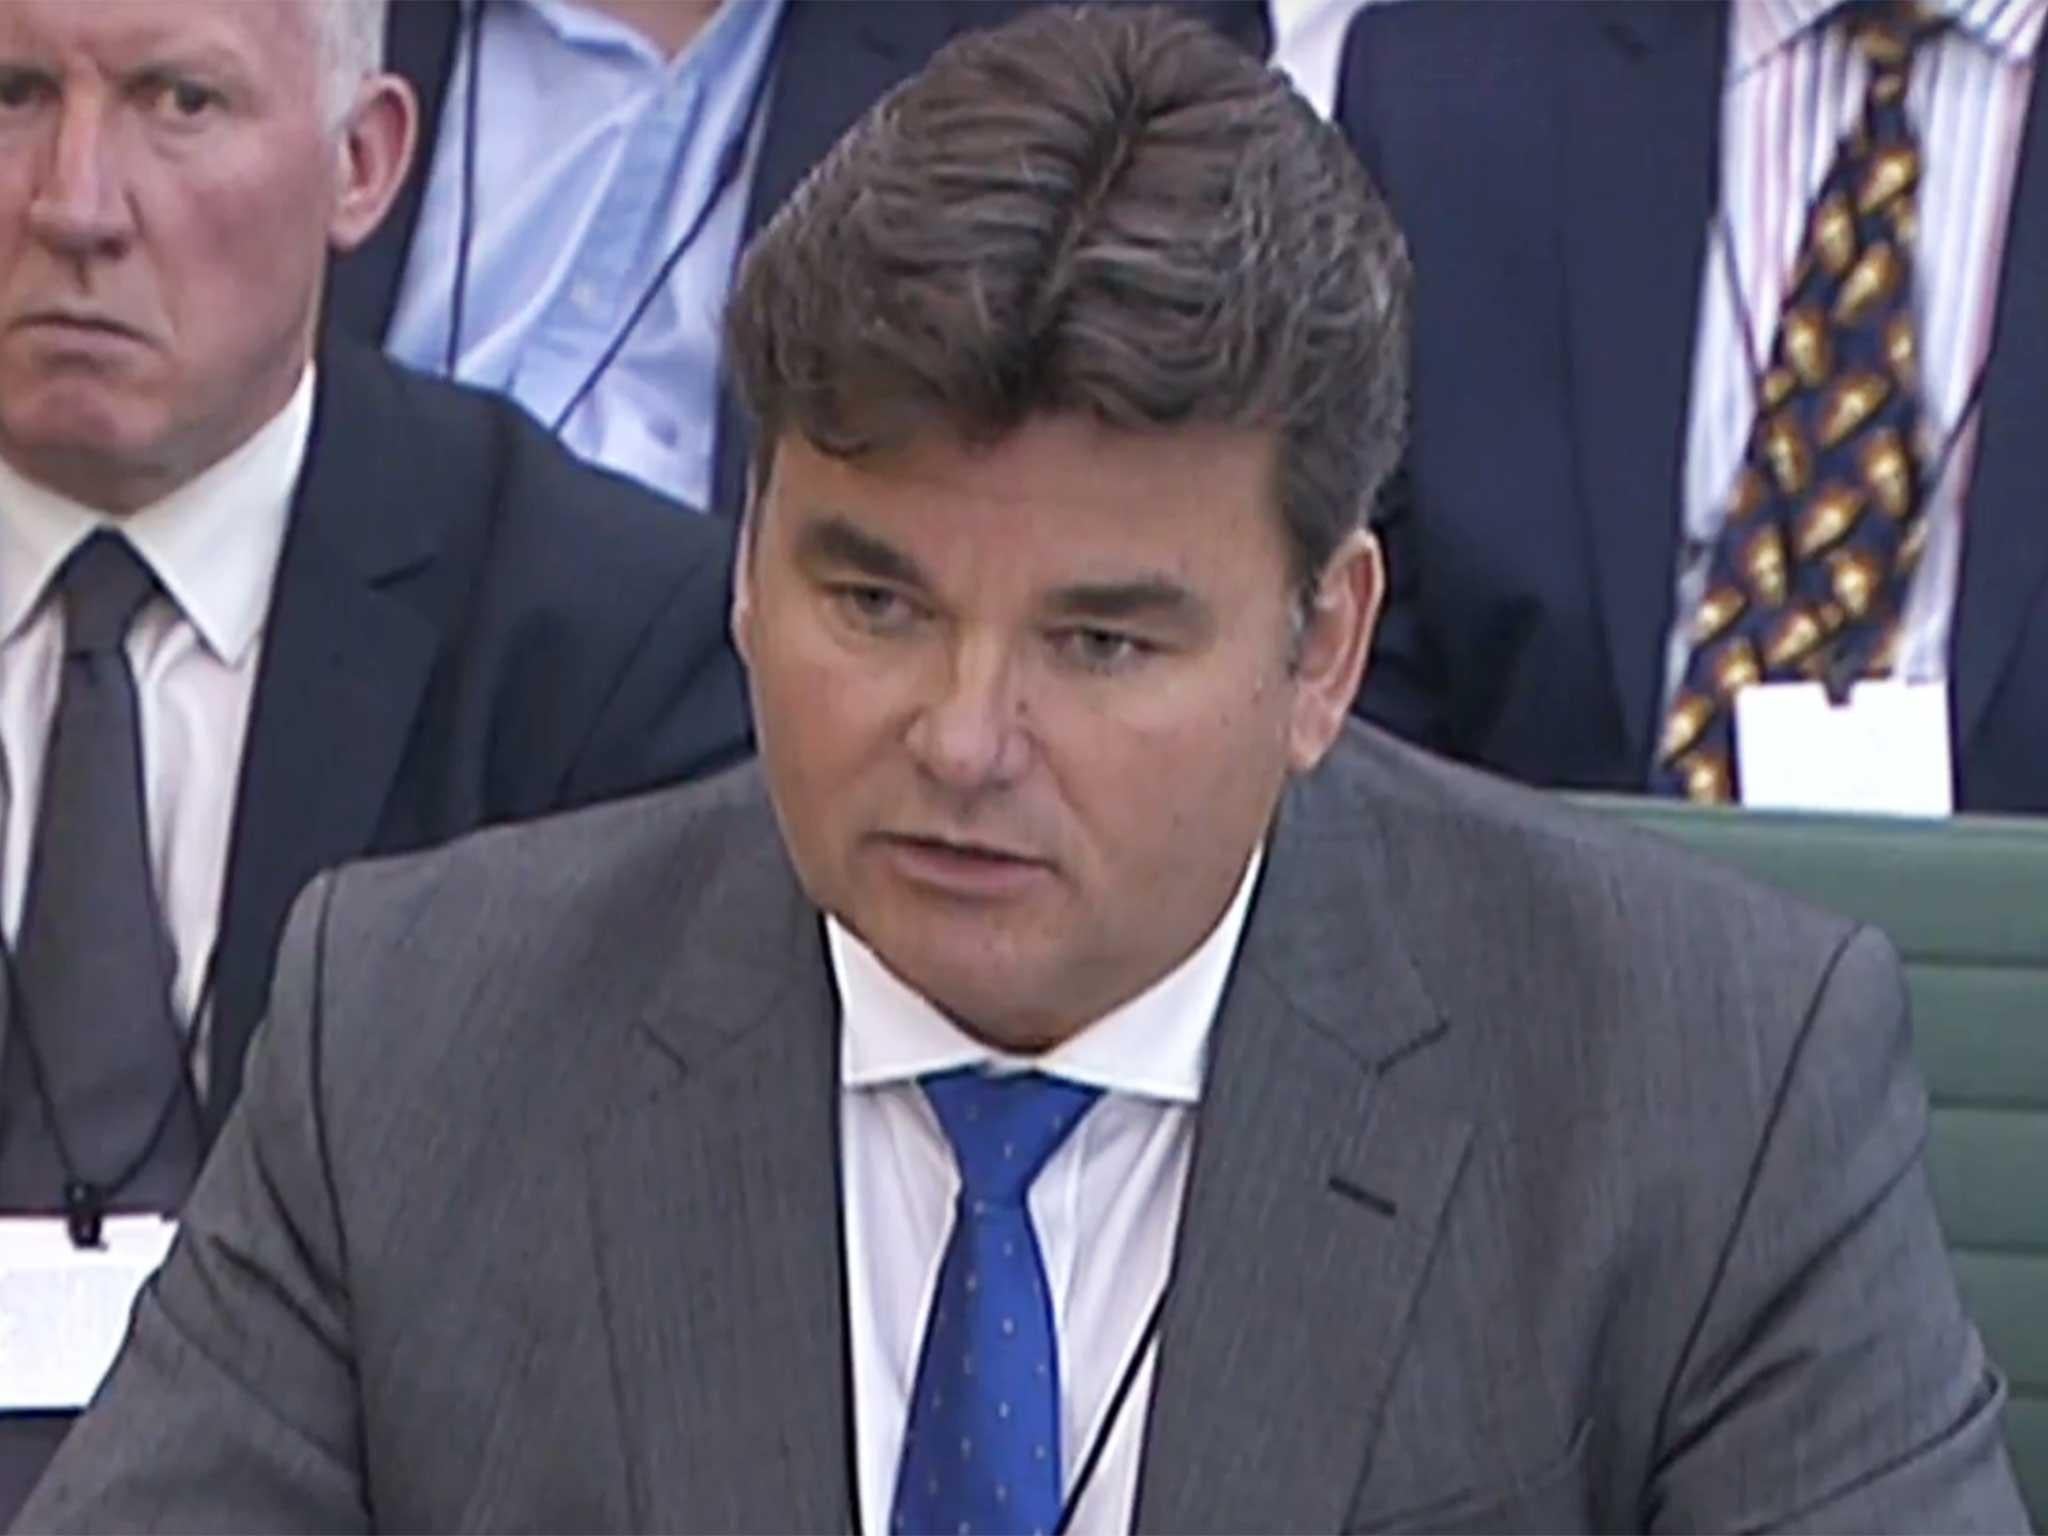 Dominic Chappell defends himself against MPs' questions